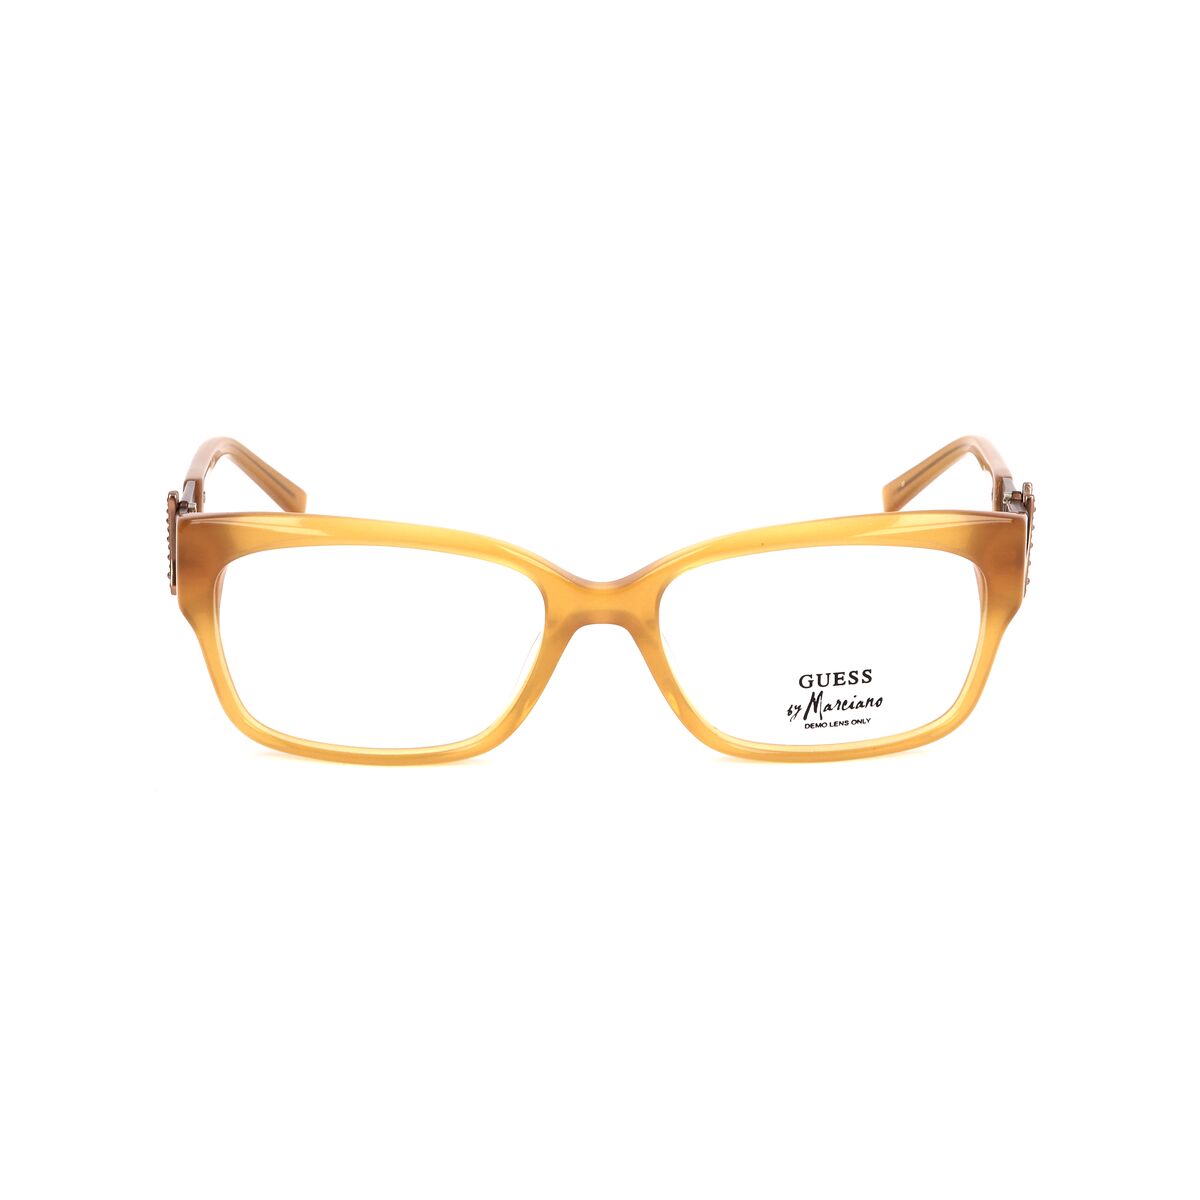 Unisex'Spectacle frame Guess Marciano GM0137-A15 ø 52 mm